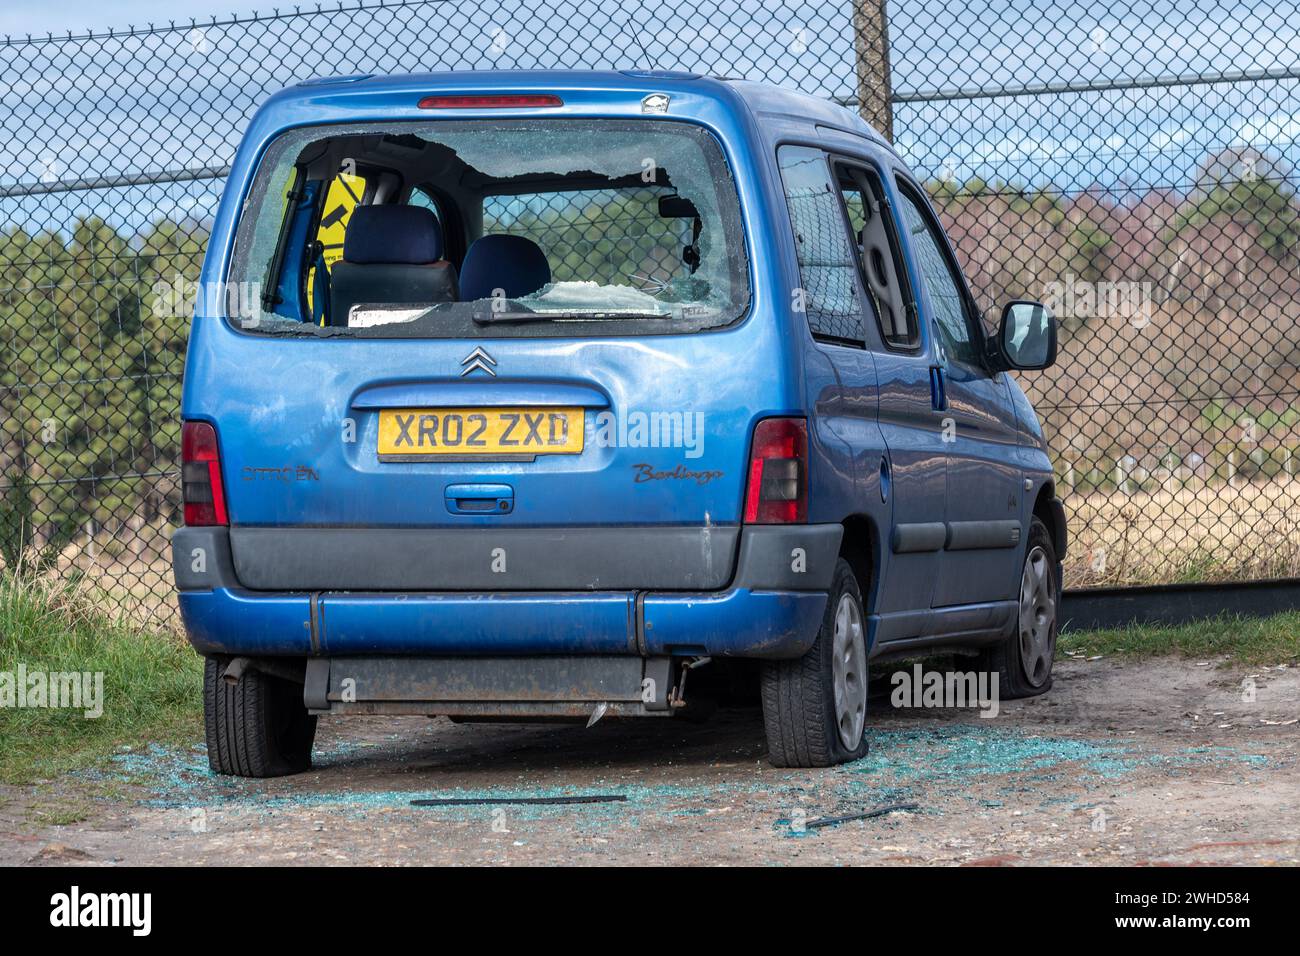 Car crime concept: a car with a smashed rear windscreen Stock Photo